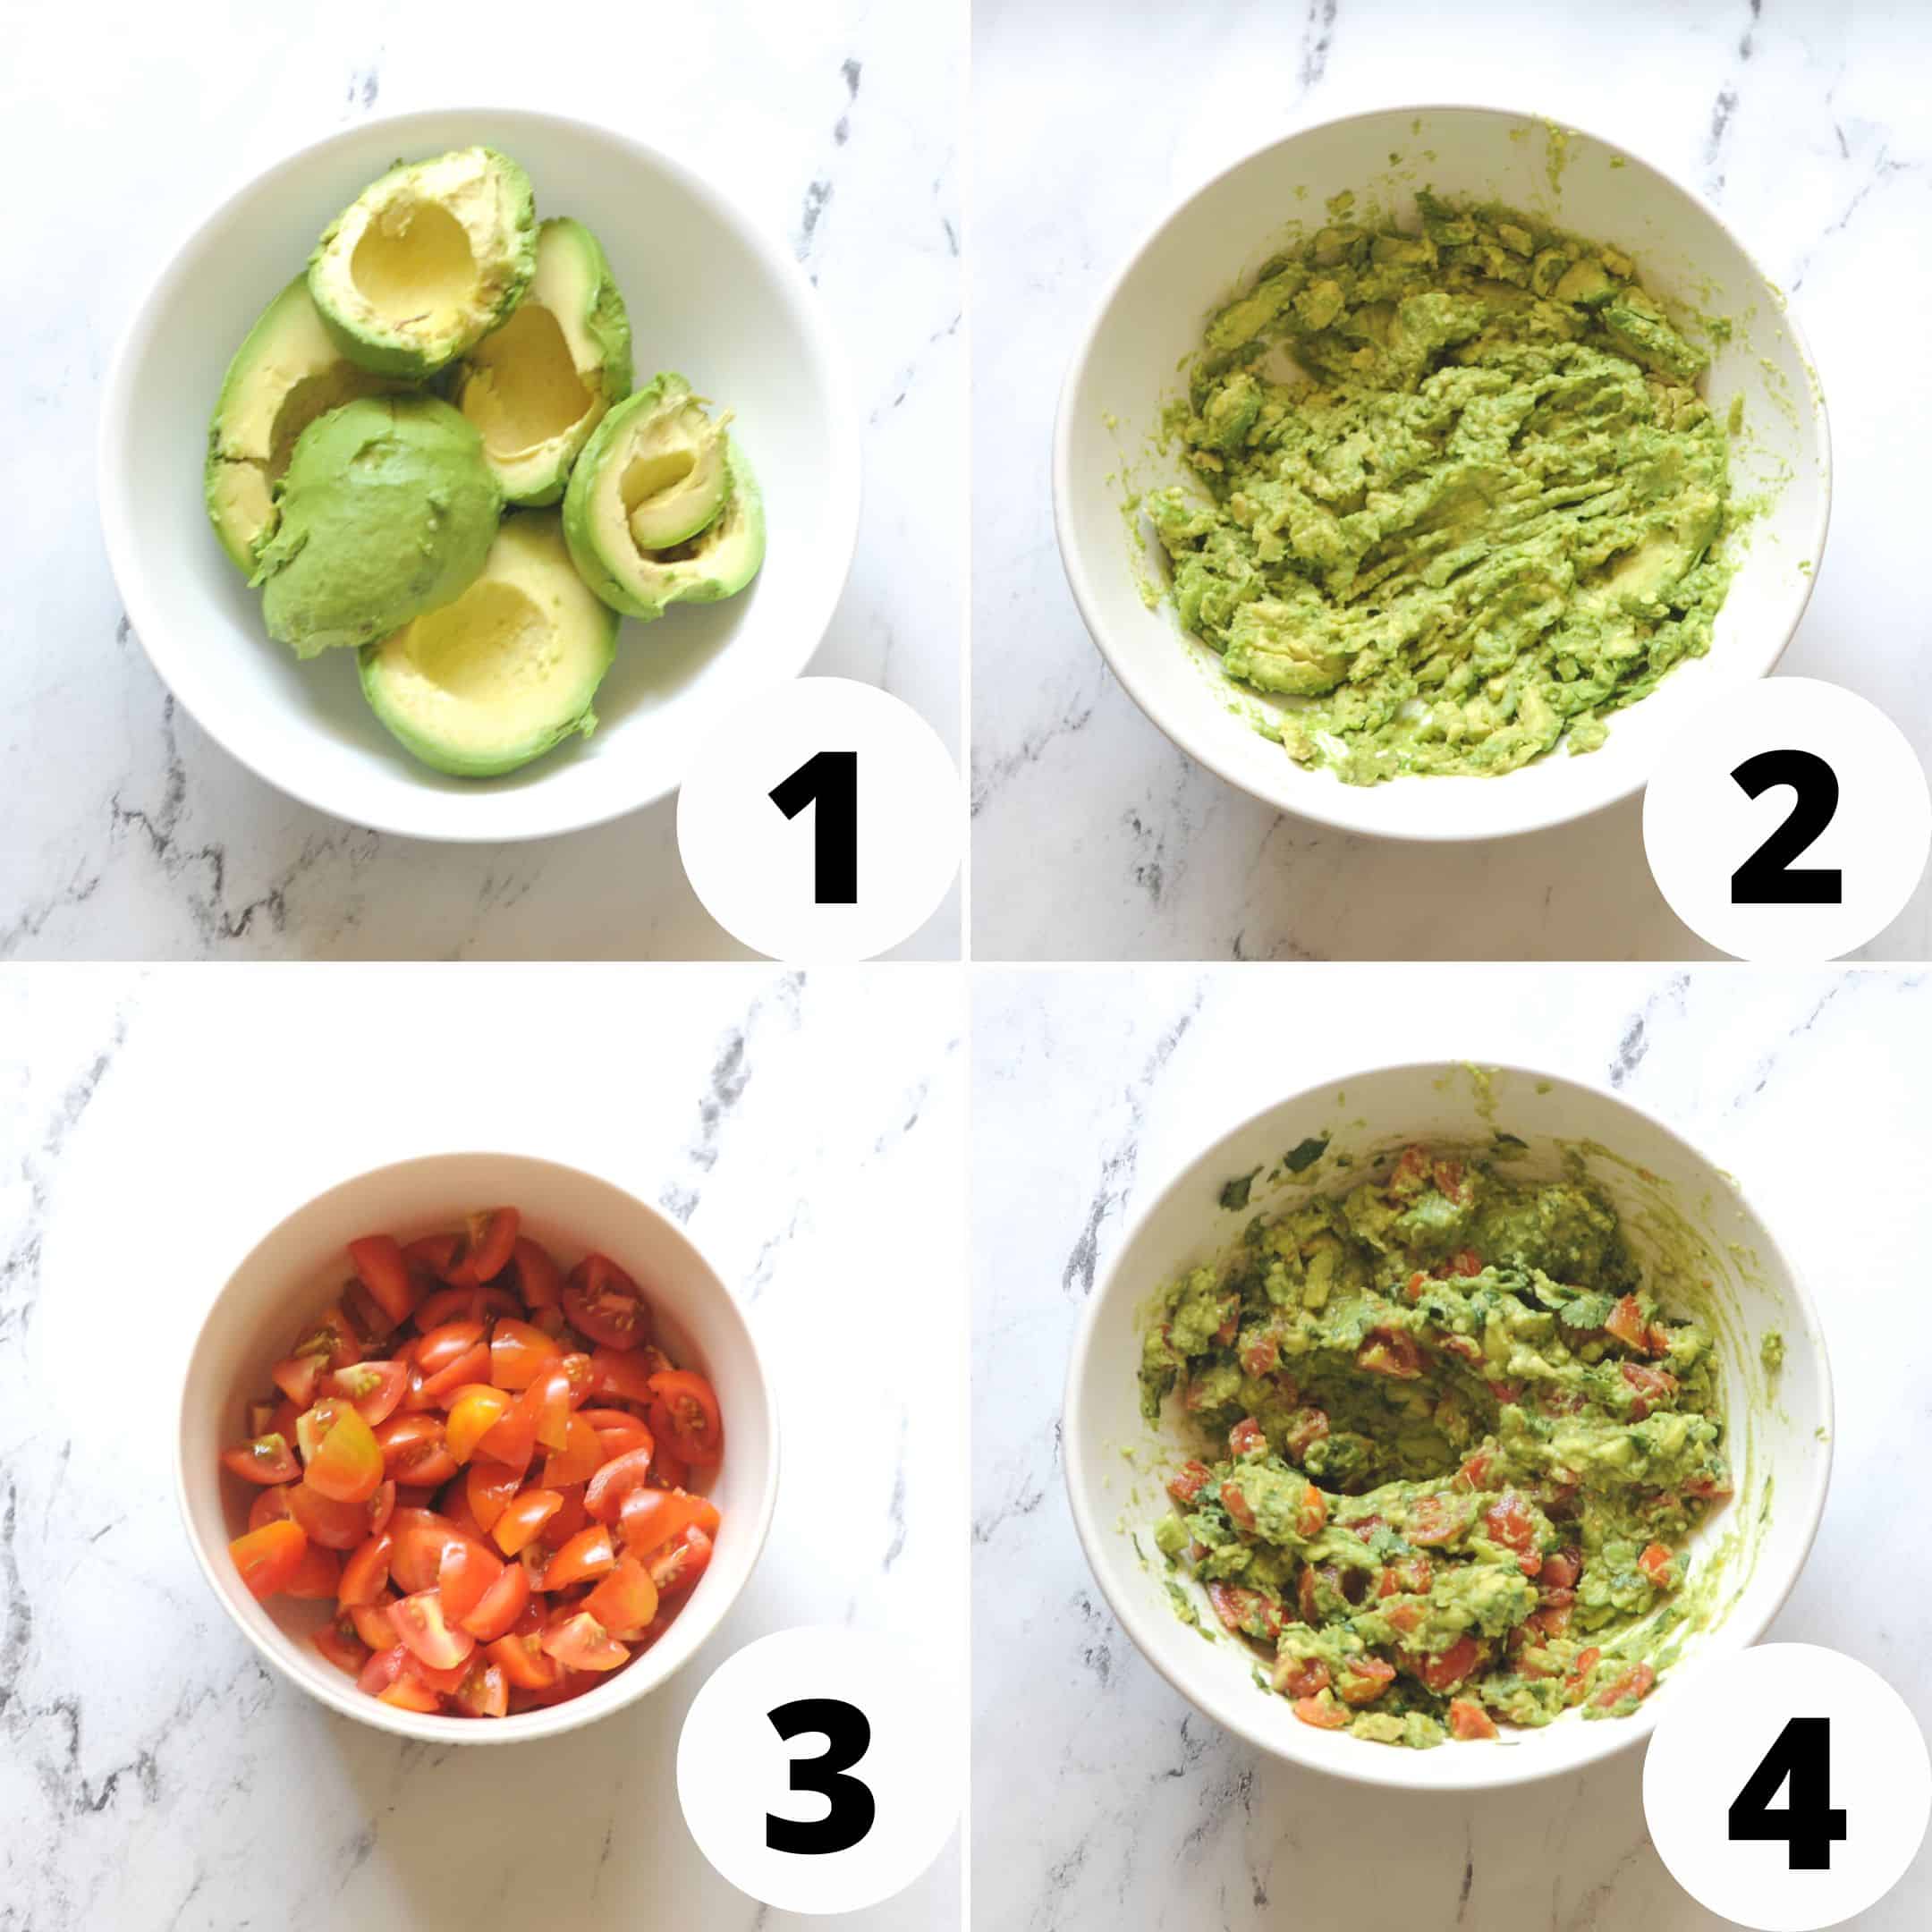 step by step guide on how to make guacamole without onions